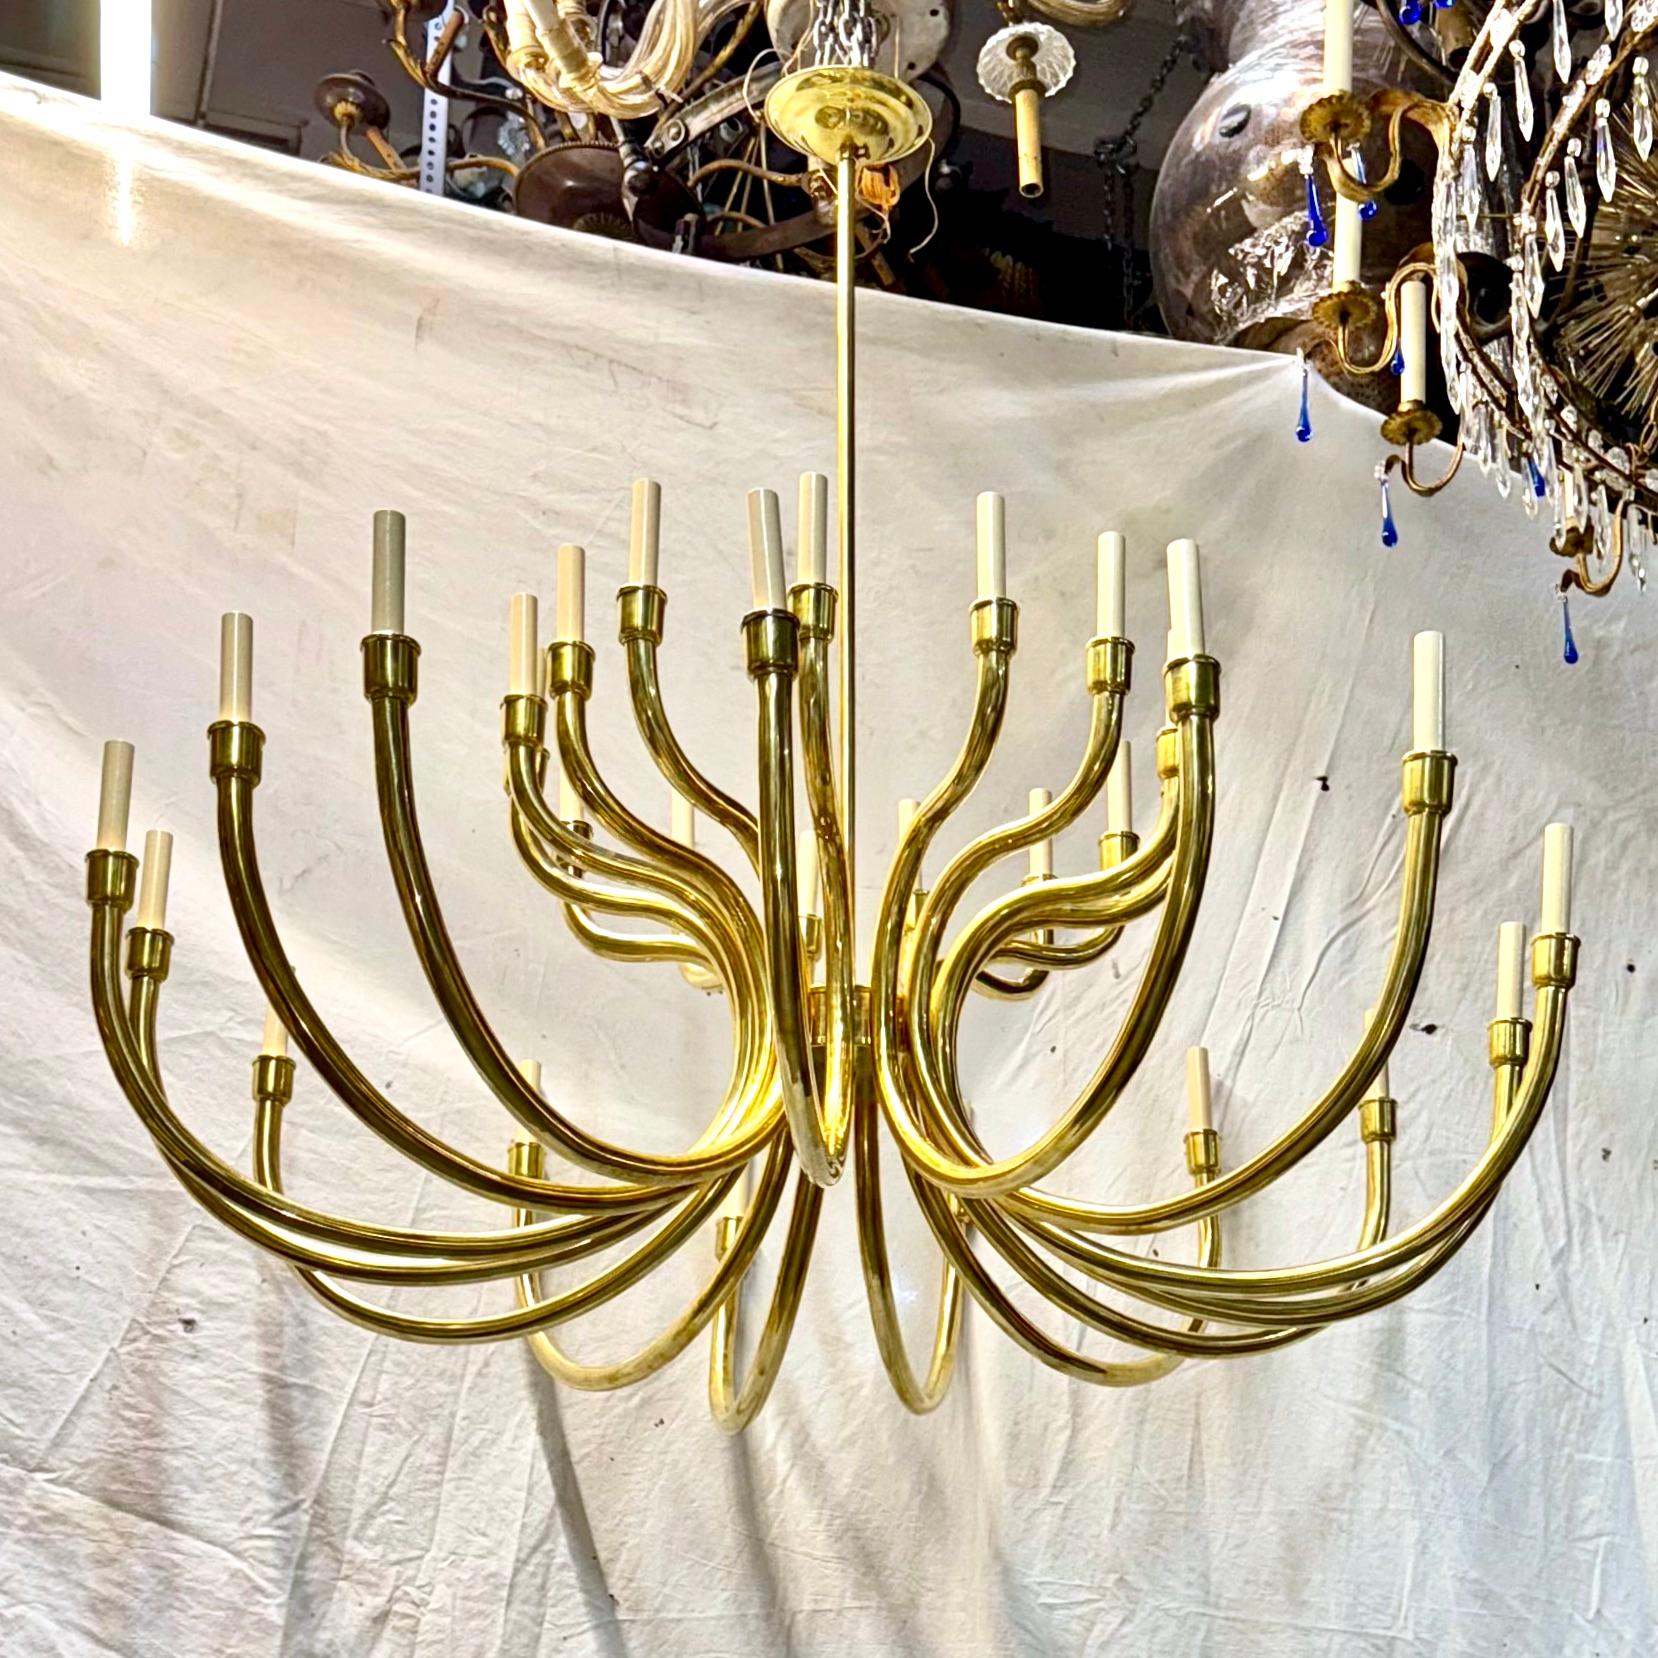 A circa 1960's French polished bronze chandelier with 28 lights.

Measurements:
Current drop: 50